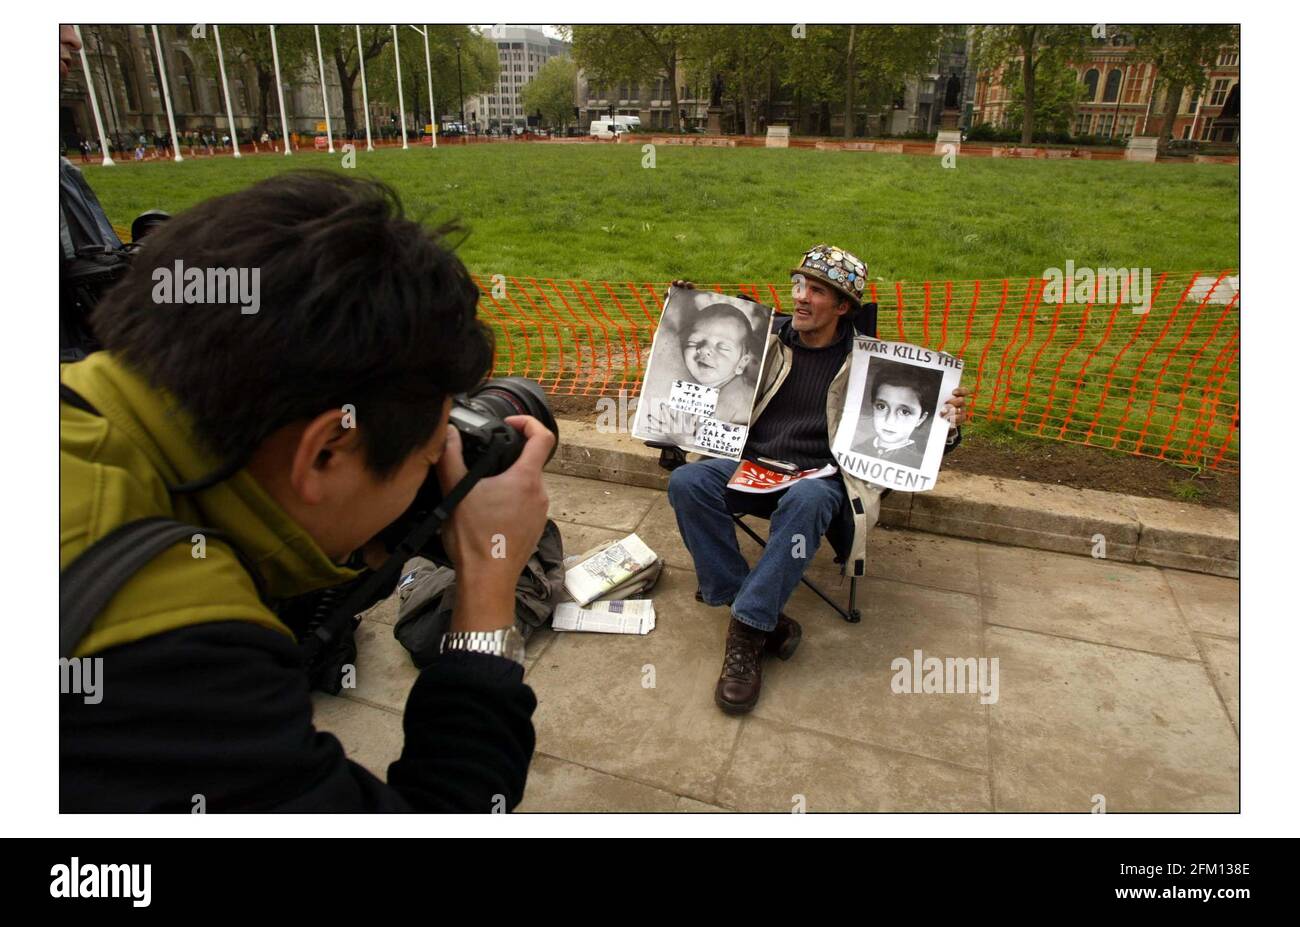 Back outside Westminster....... protester Brian Haw, who Police arrested last night. He had been camped outside the Houses of Parliament in London for nearly three yearsprotesting against the warspic David Sandison 10/5/2004 Stock Photo